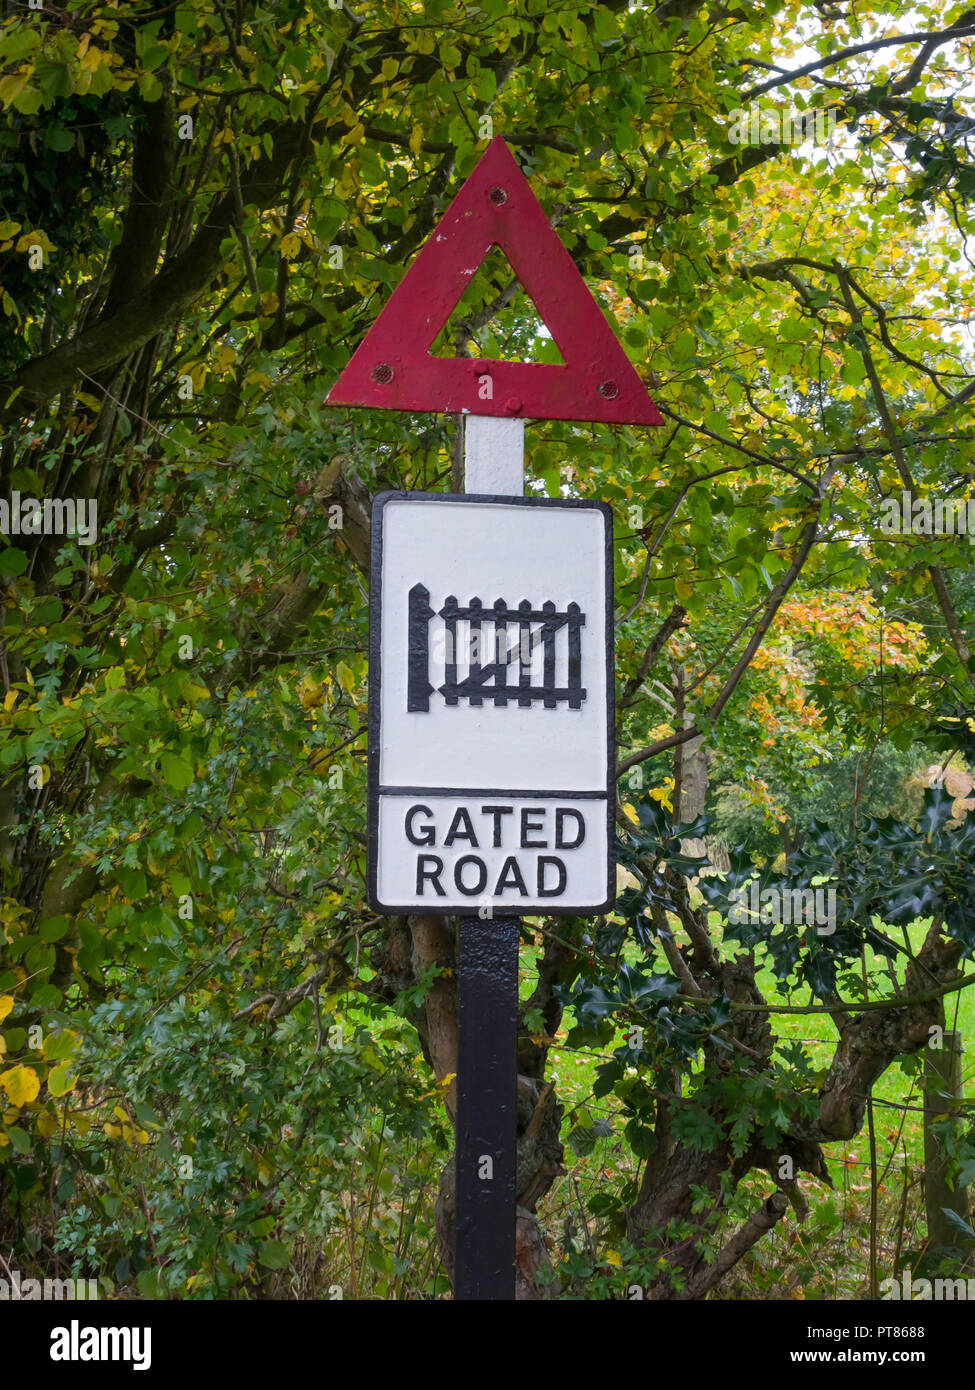 Old Fashioned Gated Road Traffic Sign Now Used To Warn Of A Level Crossing Ahead Ryedale Folk Museum Hutton Le Hole North Yorkshire England Uk Stock Photo Alamy